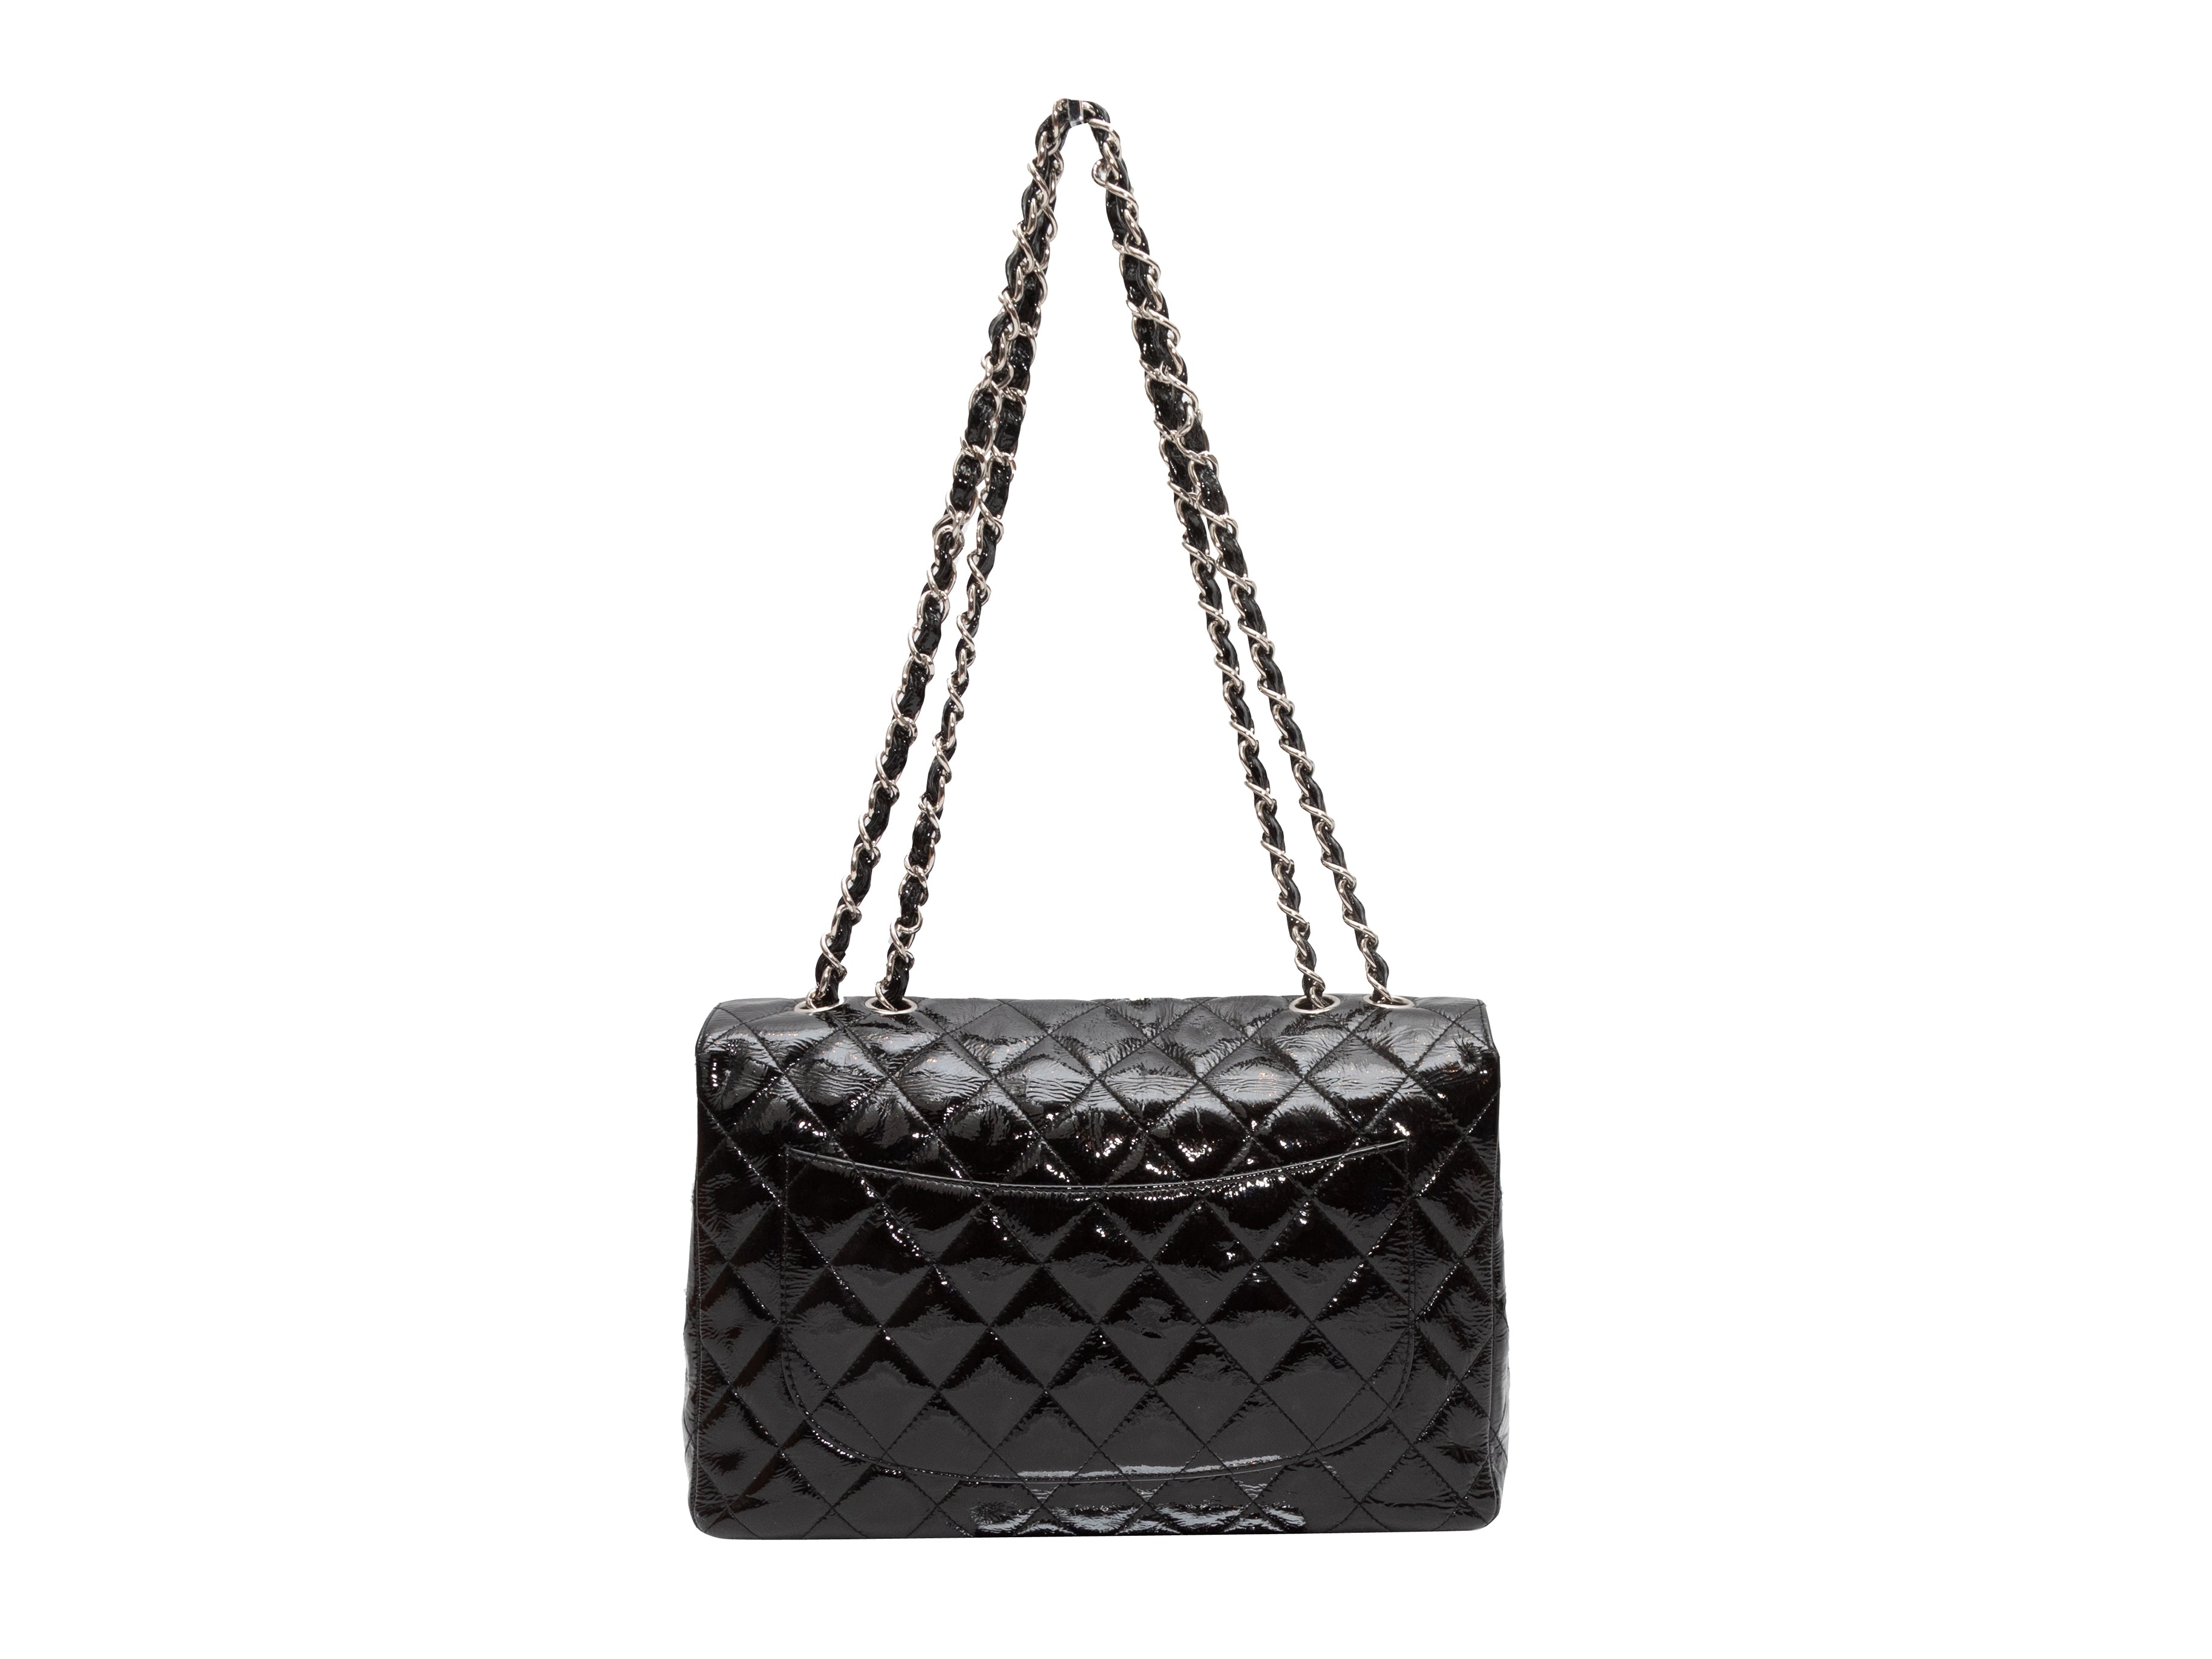 2006 Chanel Black Quilted Caviar Leather Jumbo Classic SingleFlap Bag